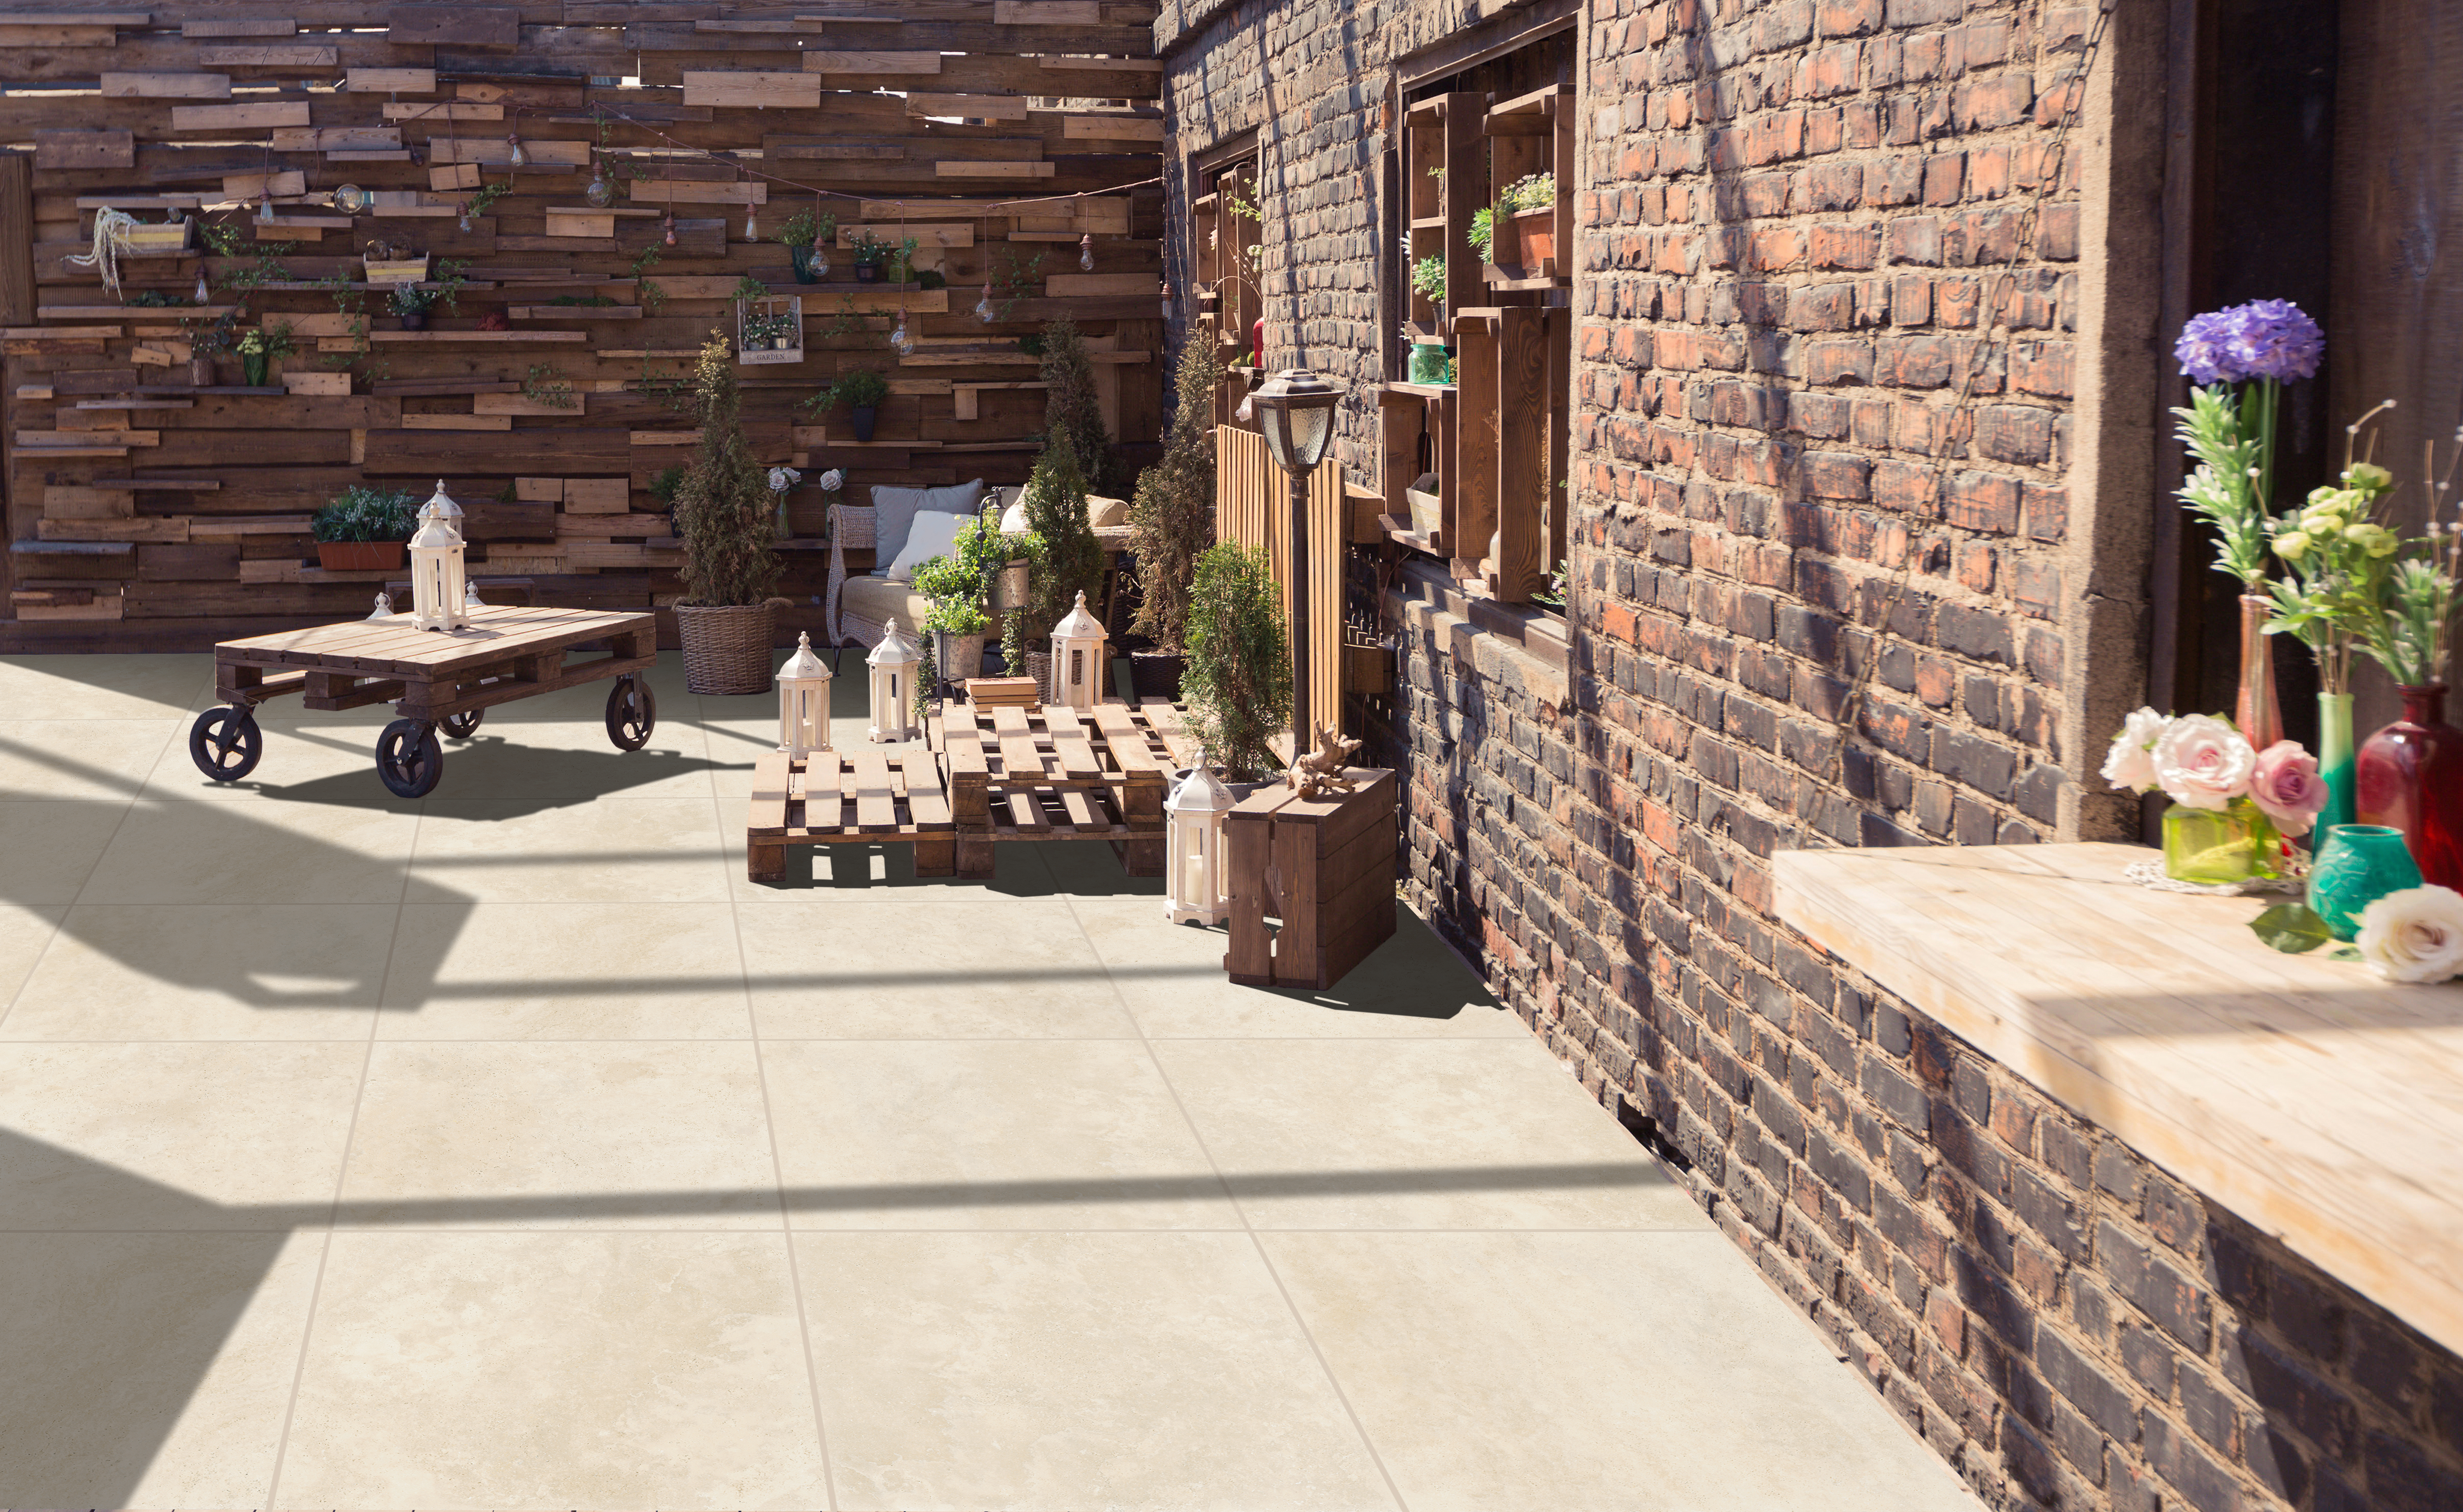 Outdoor patio area with stone tile, brick wall backdrop near building